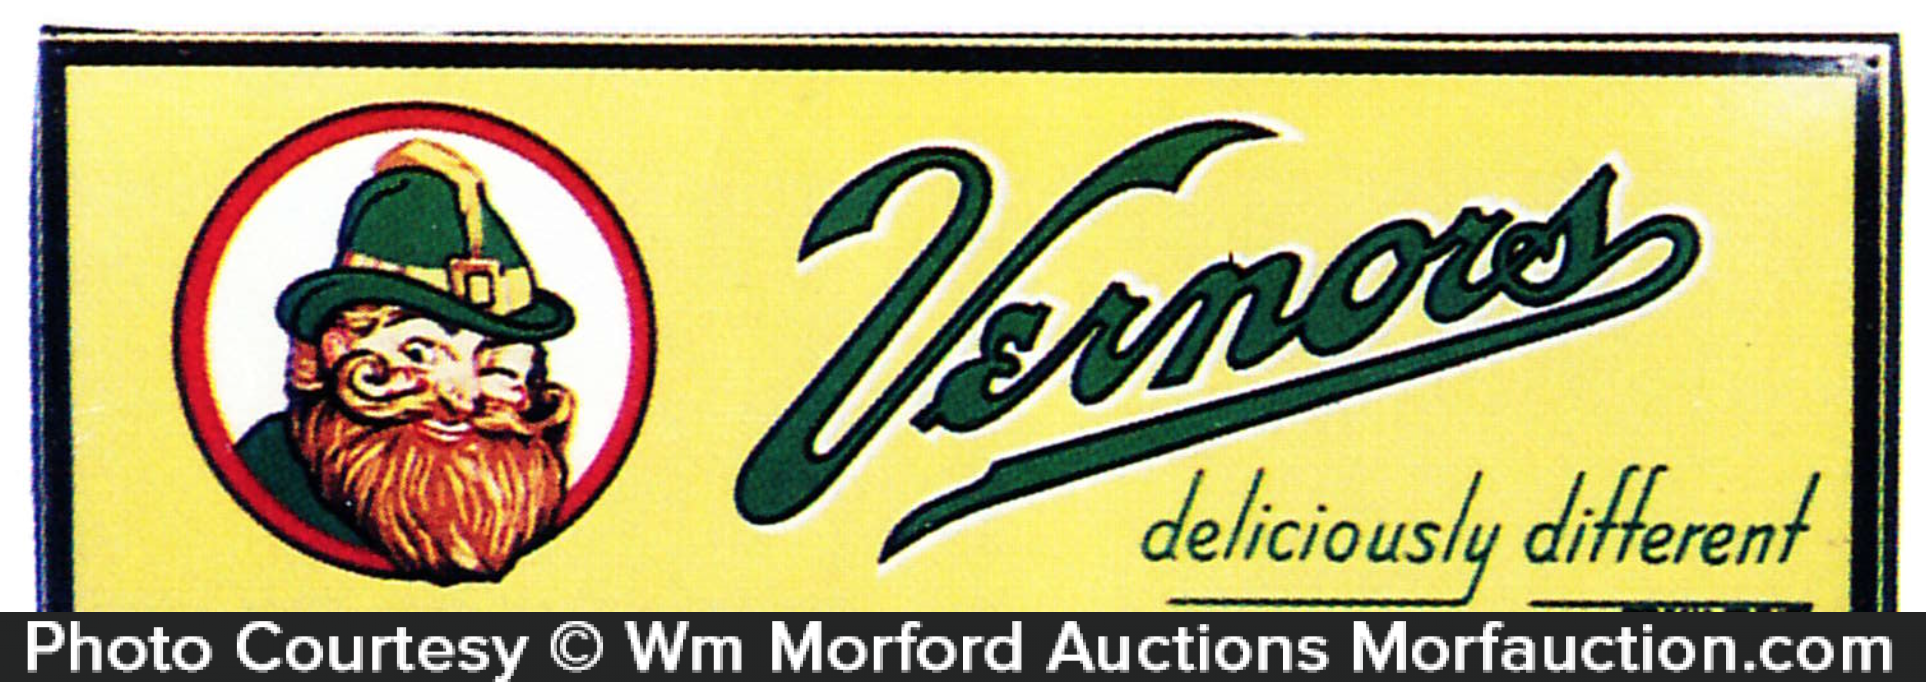 Antique Advertising | Vernors Ginger Ale Sign â¢ Antique Advertising